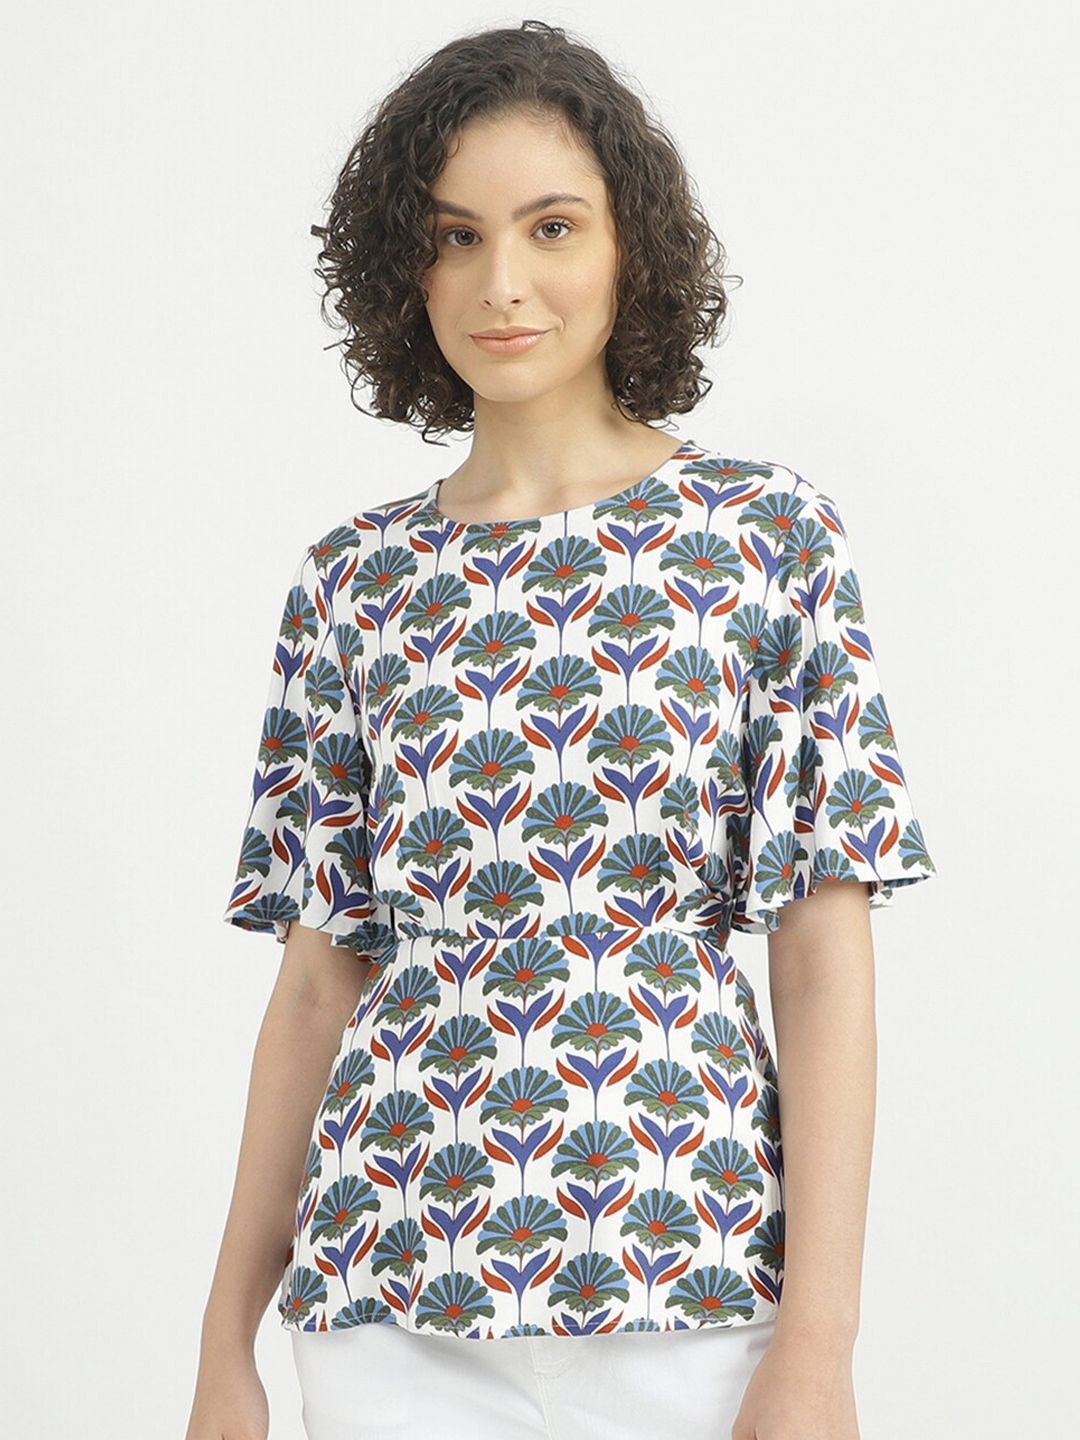 United Colors of Benetton White Print Top Price in India